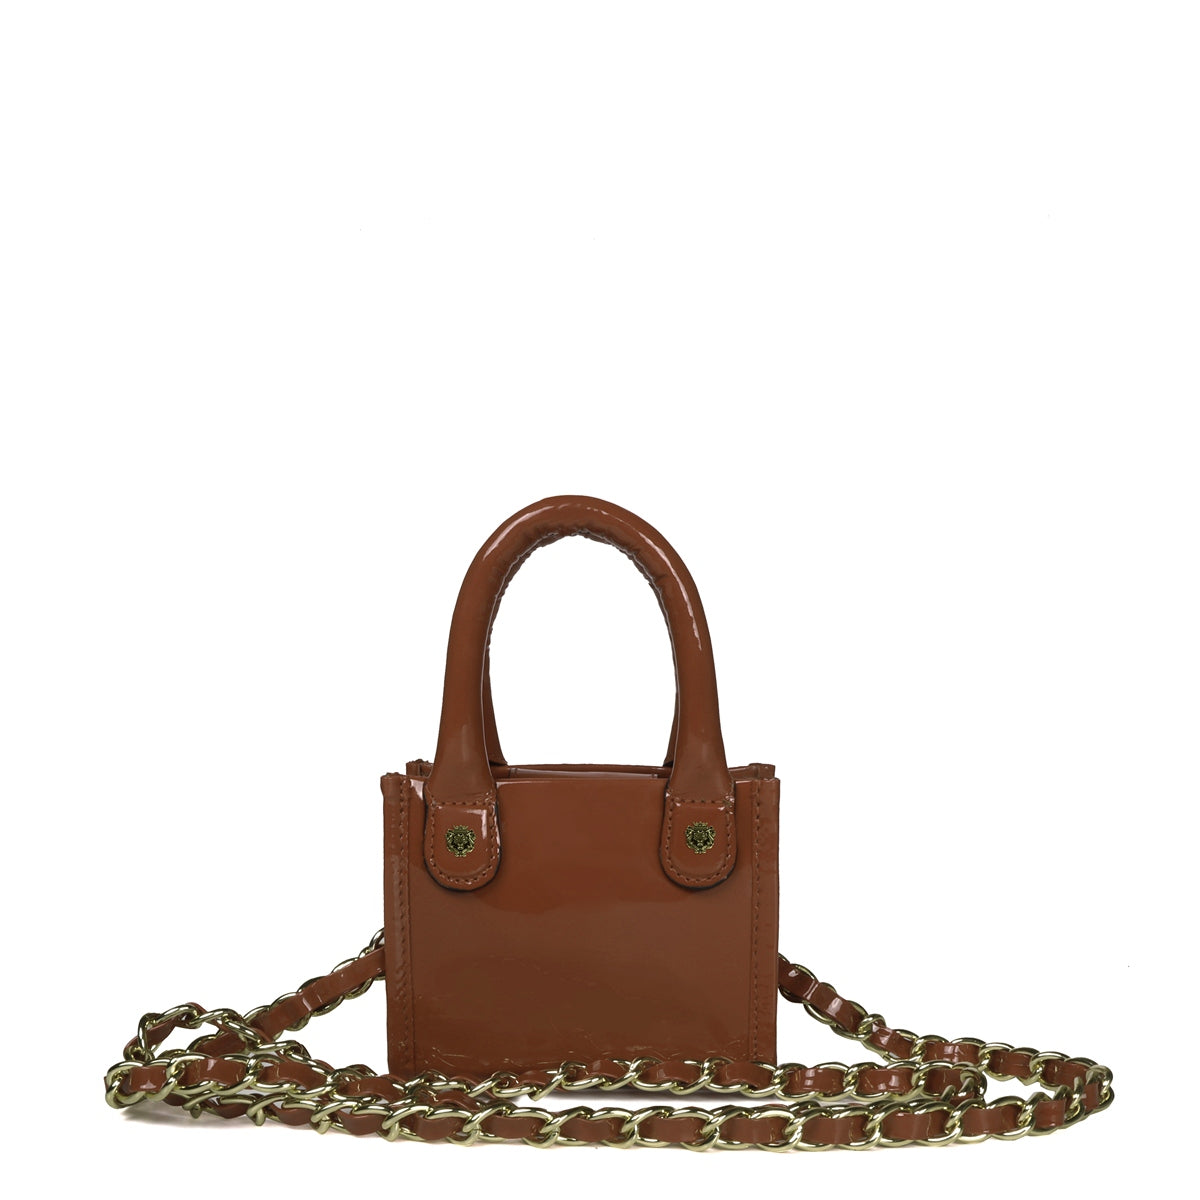 Micro Sized Hand Bag in Tan Patent Leather